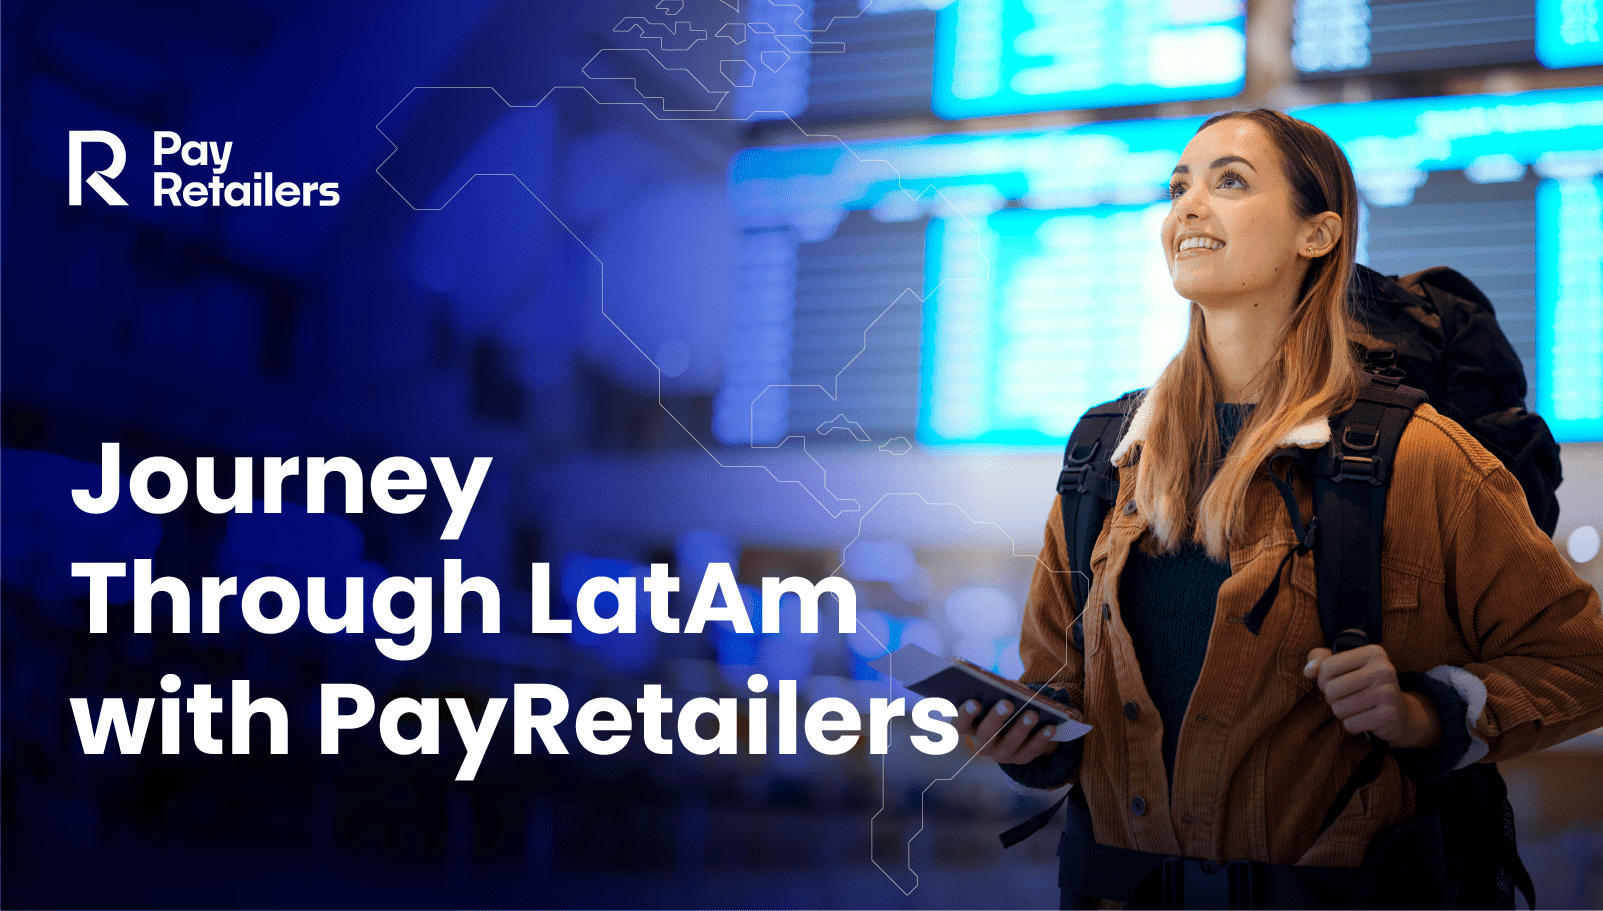 Elevating Tourism in LatAm: PayRetailers’ Empowering Digital Payment Solutions